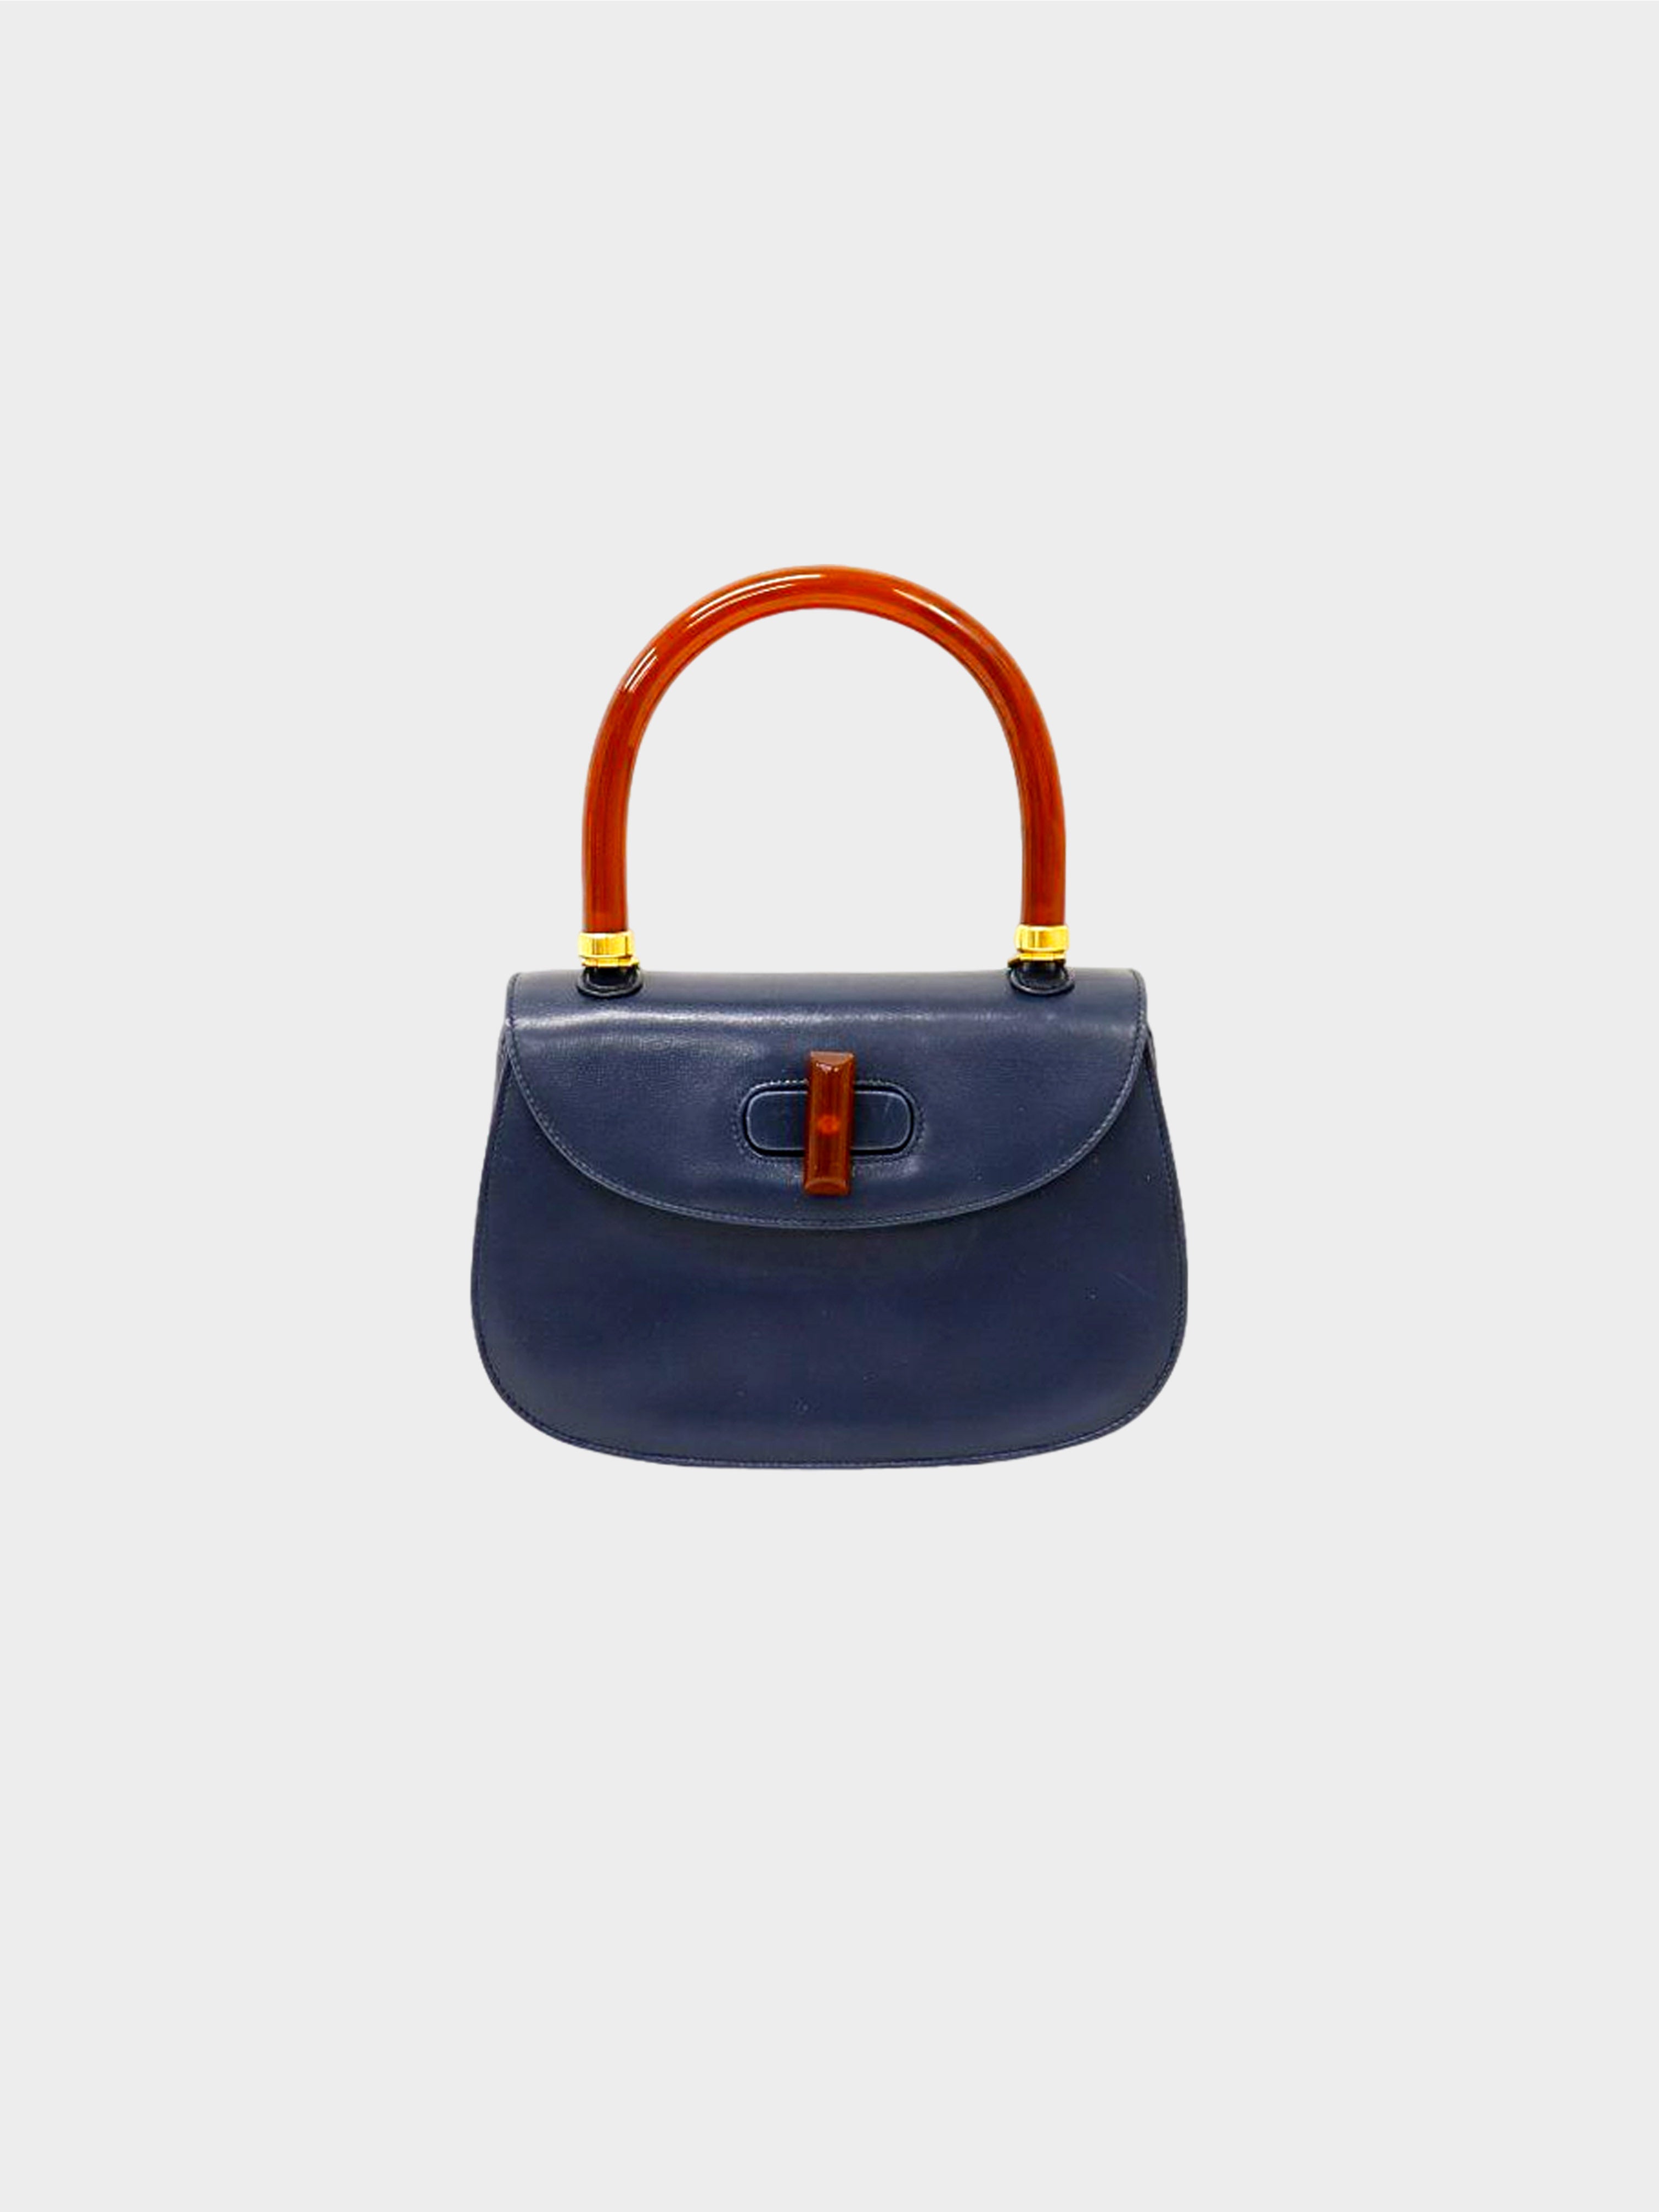 Gucci 1990s Navy Leather Turn Lock Bag